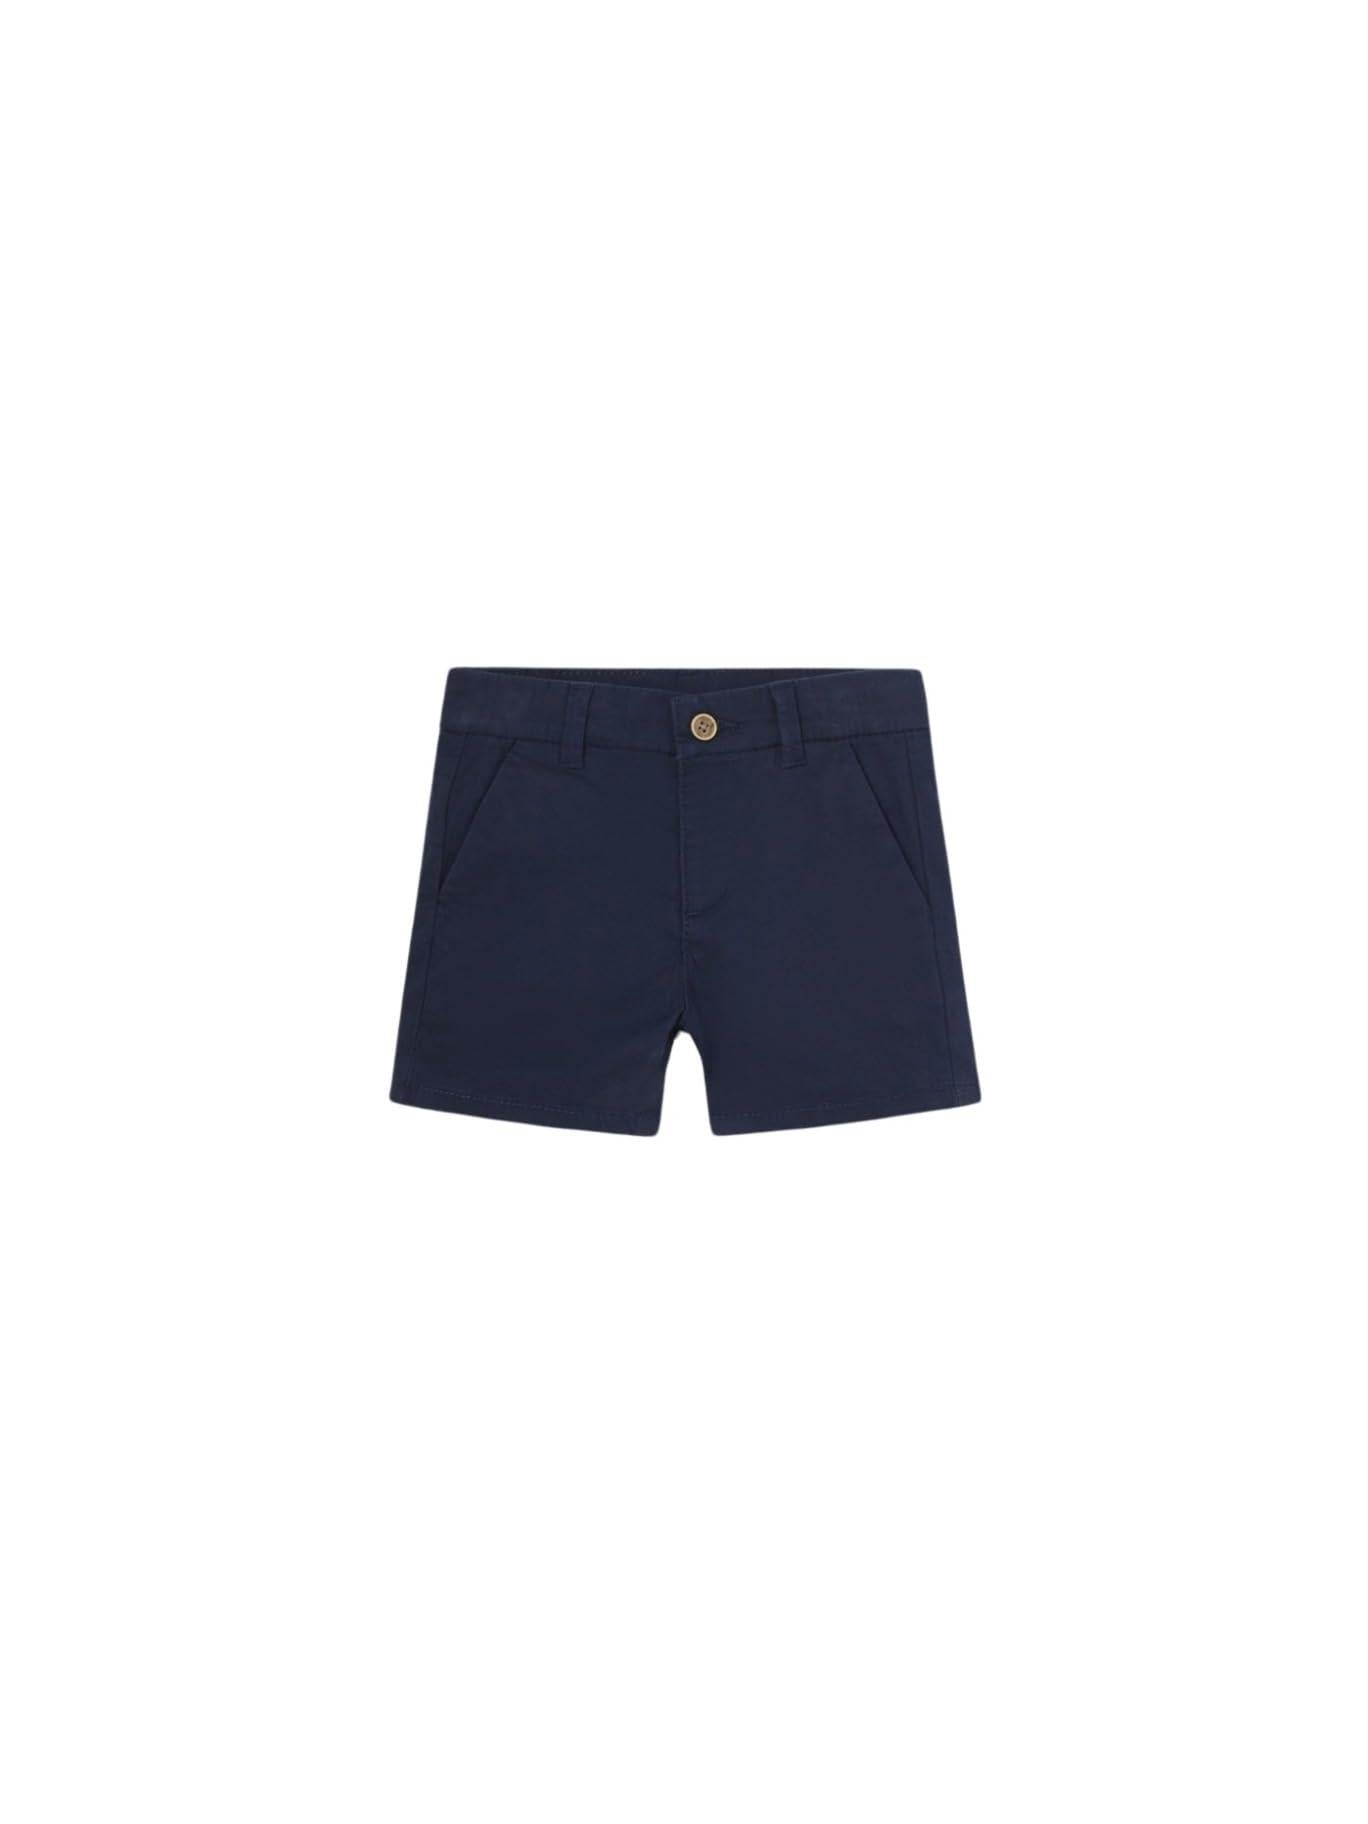 Mayoral Basic Chino Twill Shorts for Baby-Boys Navy 18 Months (86cm)